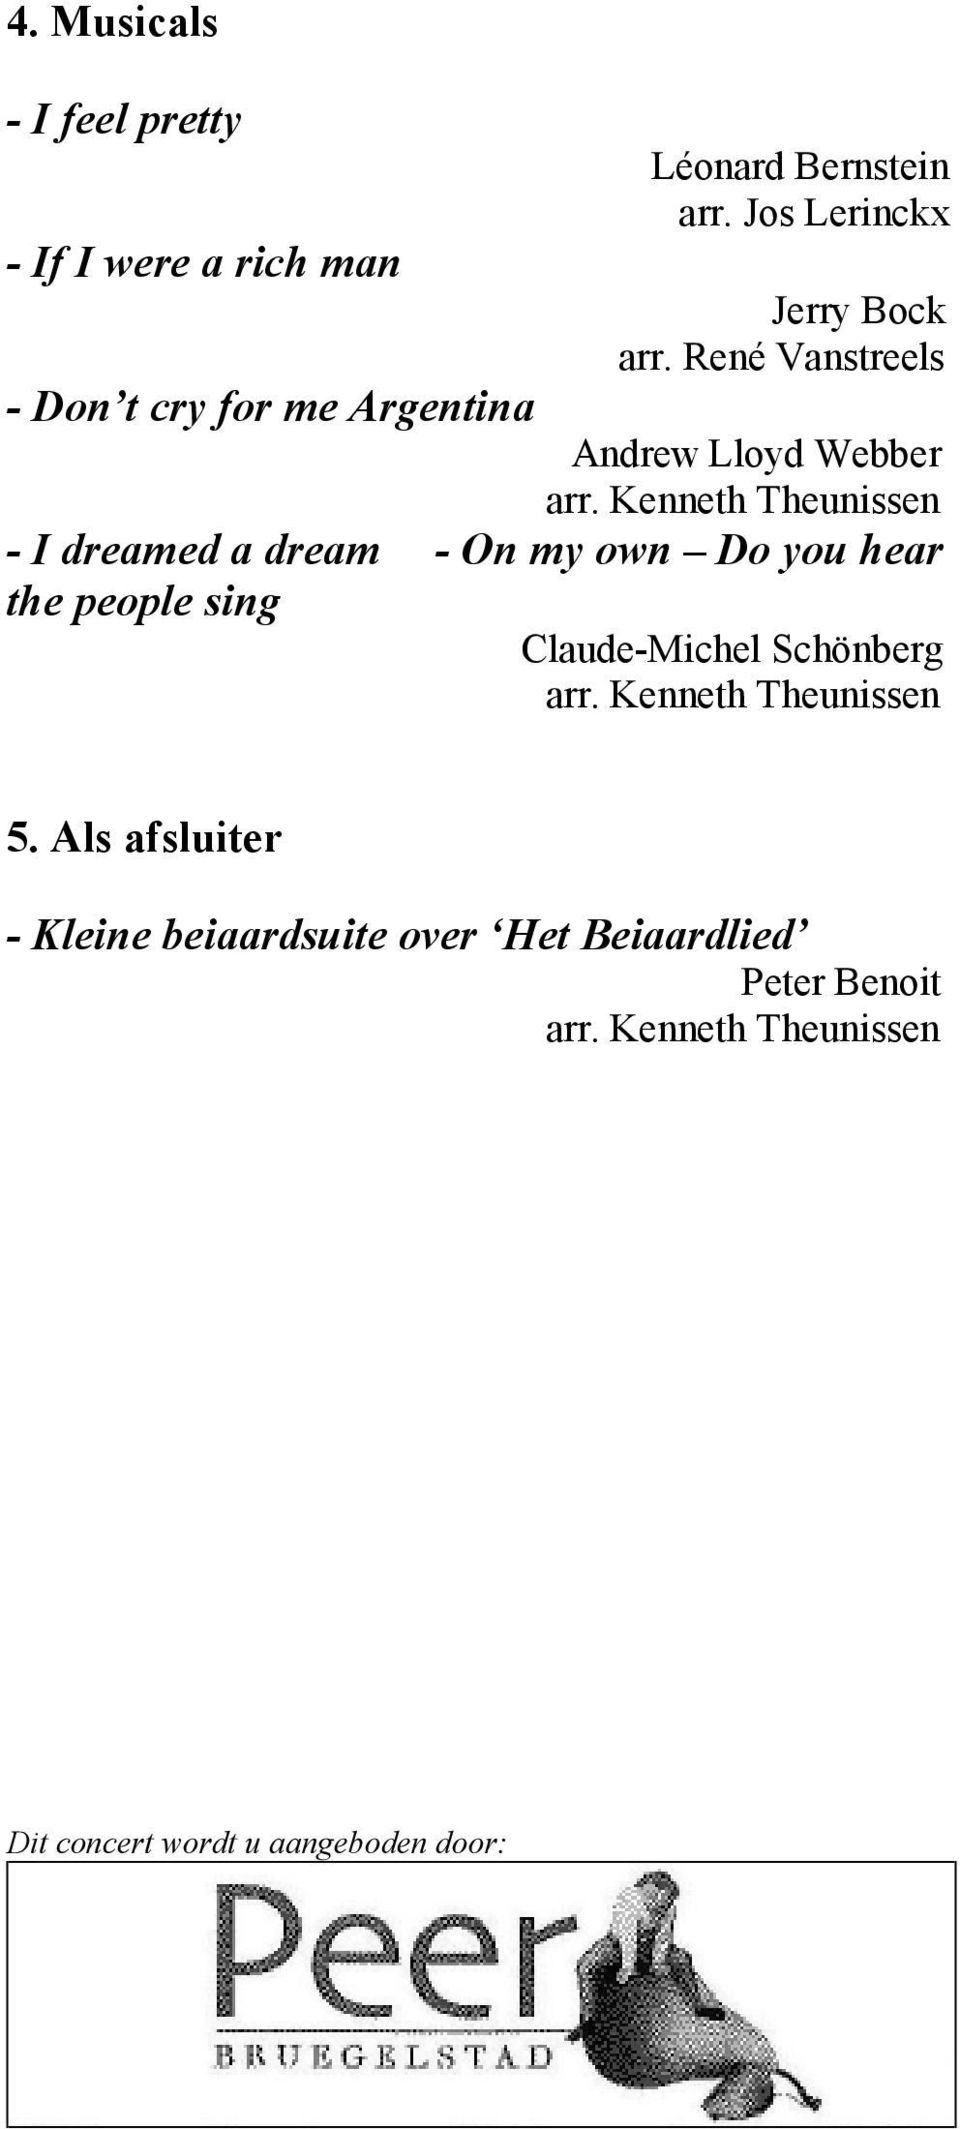 Kenneth Theunissen - I dreamed a dream - On my own Do you hear the people sing Claude-Michel